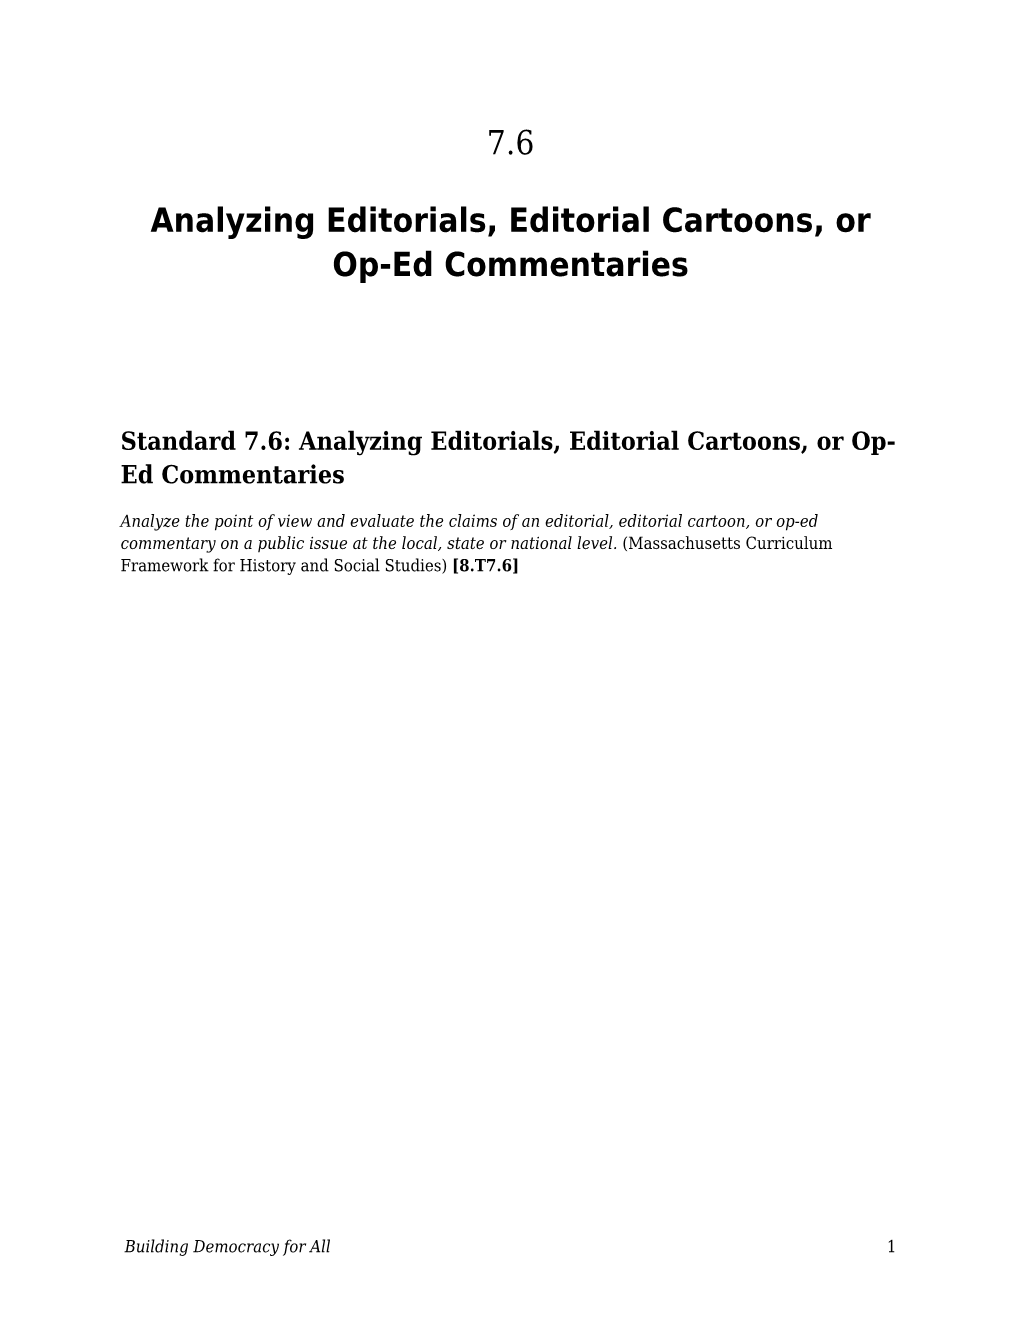 7.6 Analyzing Editorials, Editorial Cartoons, Or Op-Ed Commentaries